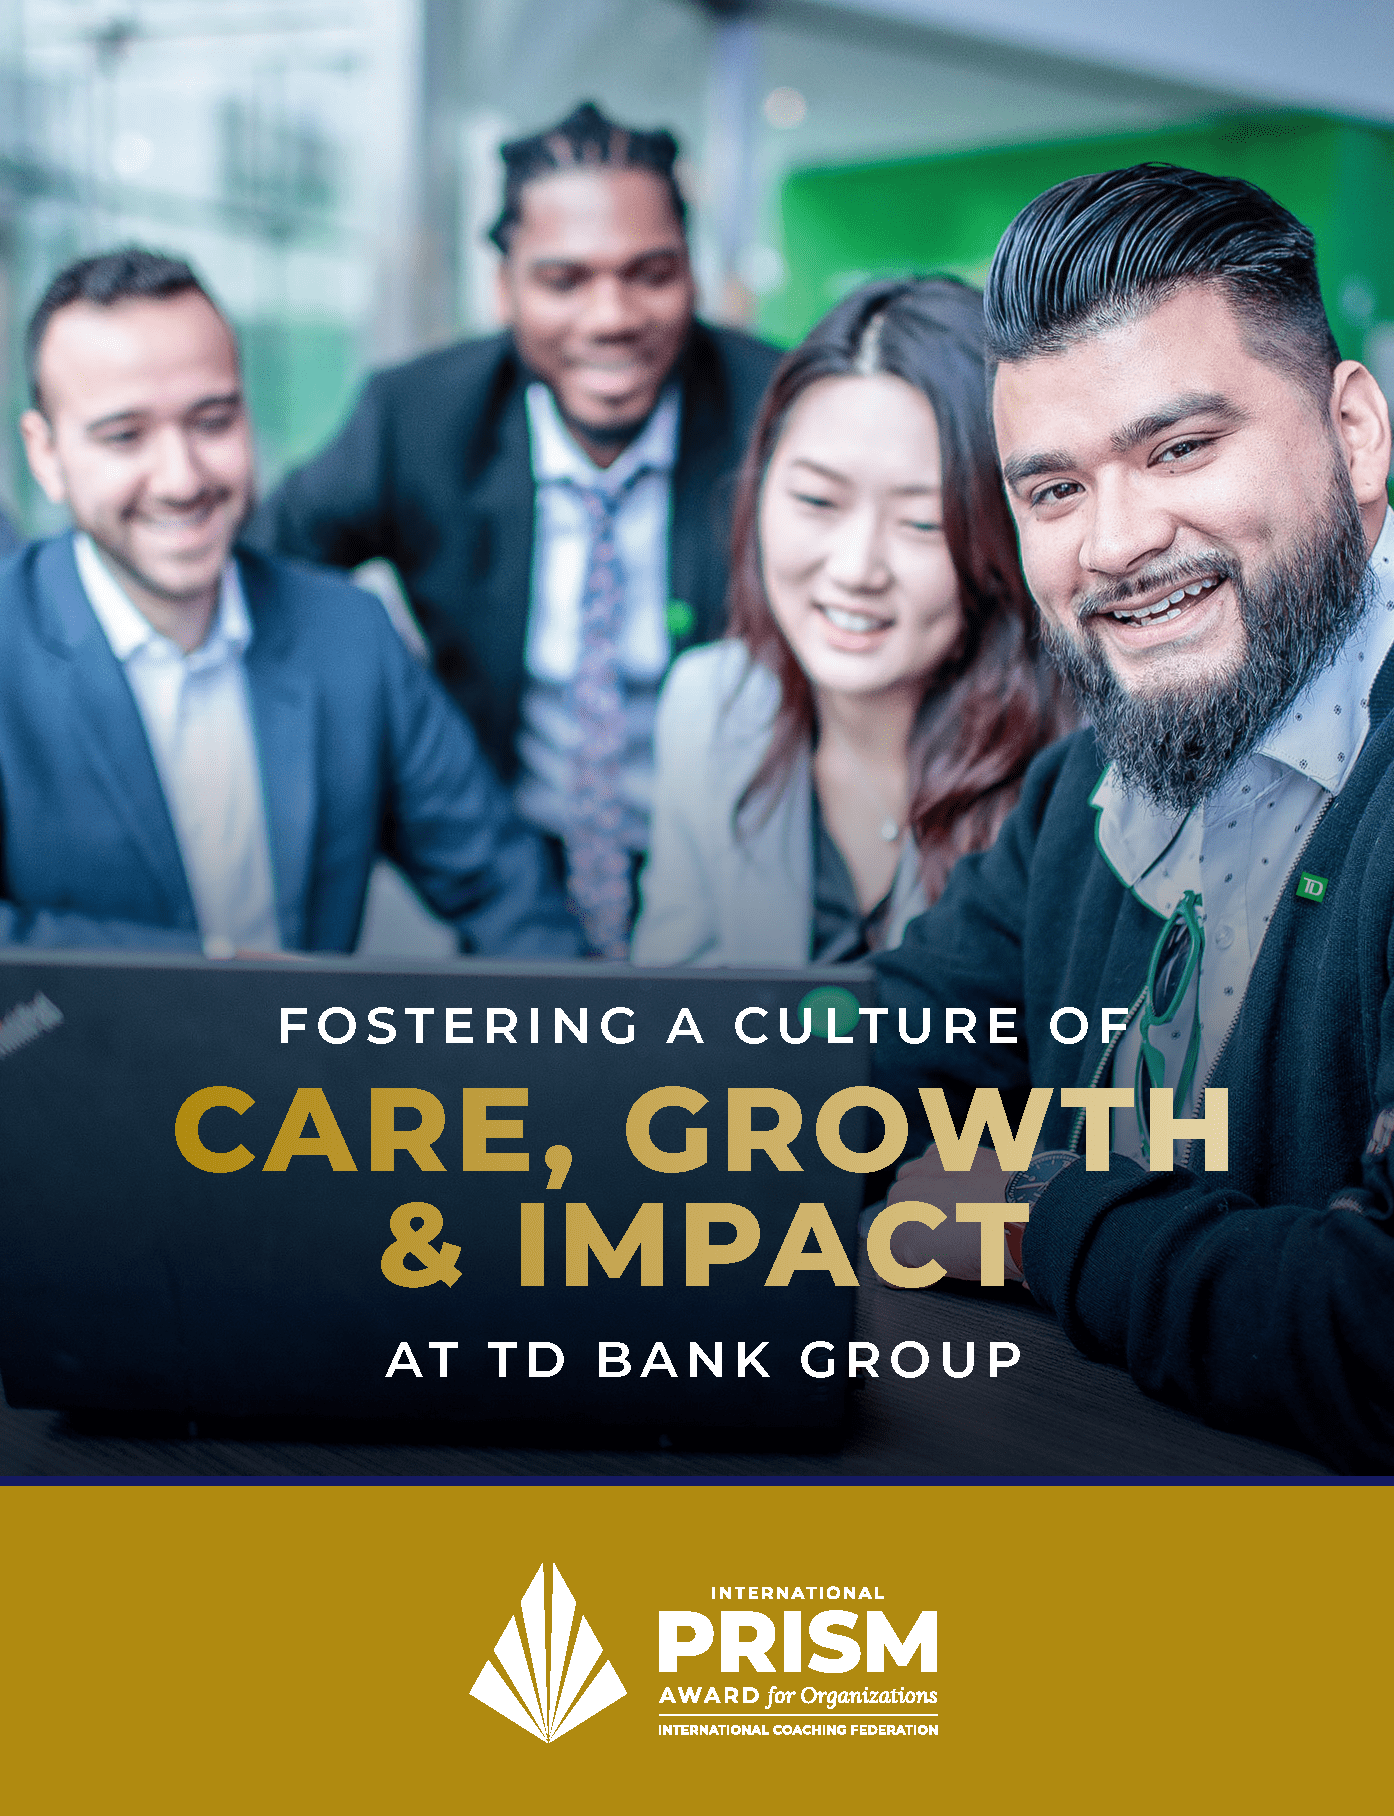 TD Bank's Team Fosters Care, Growth and Impact